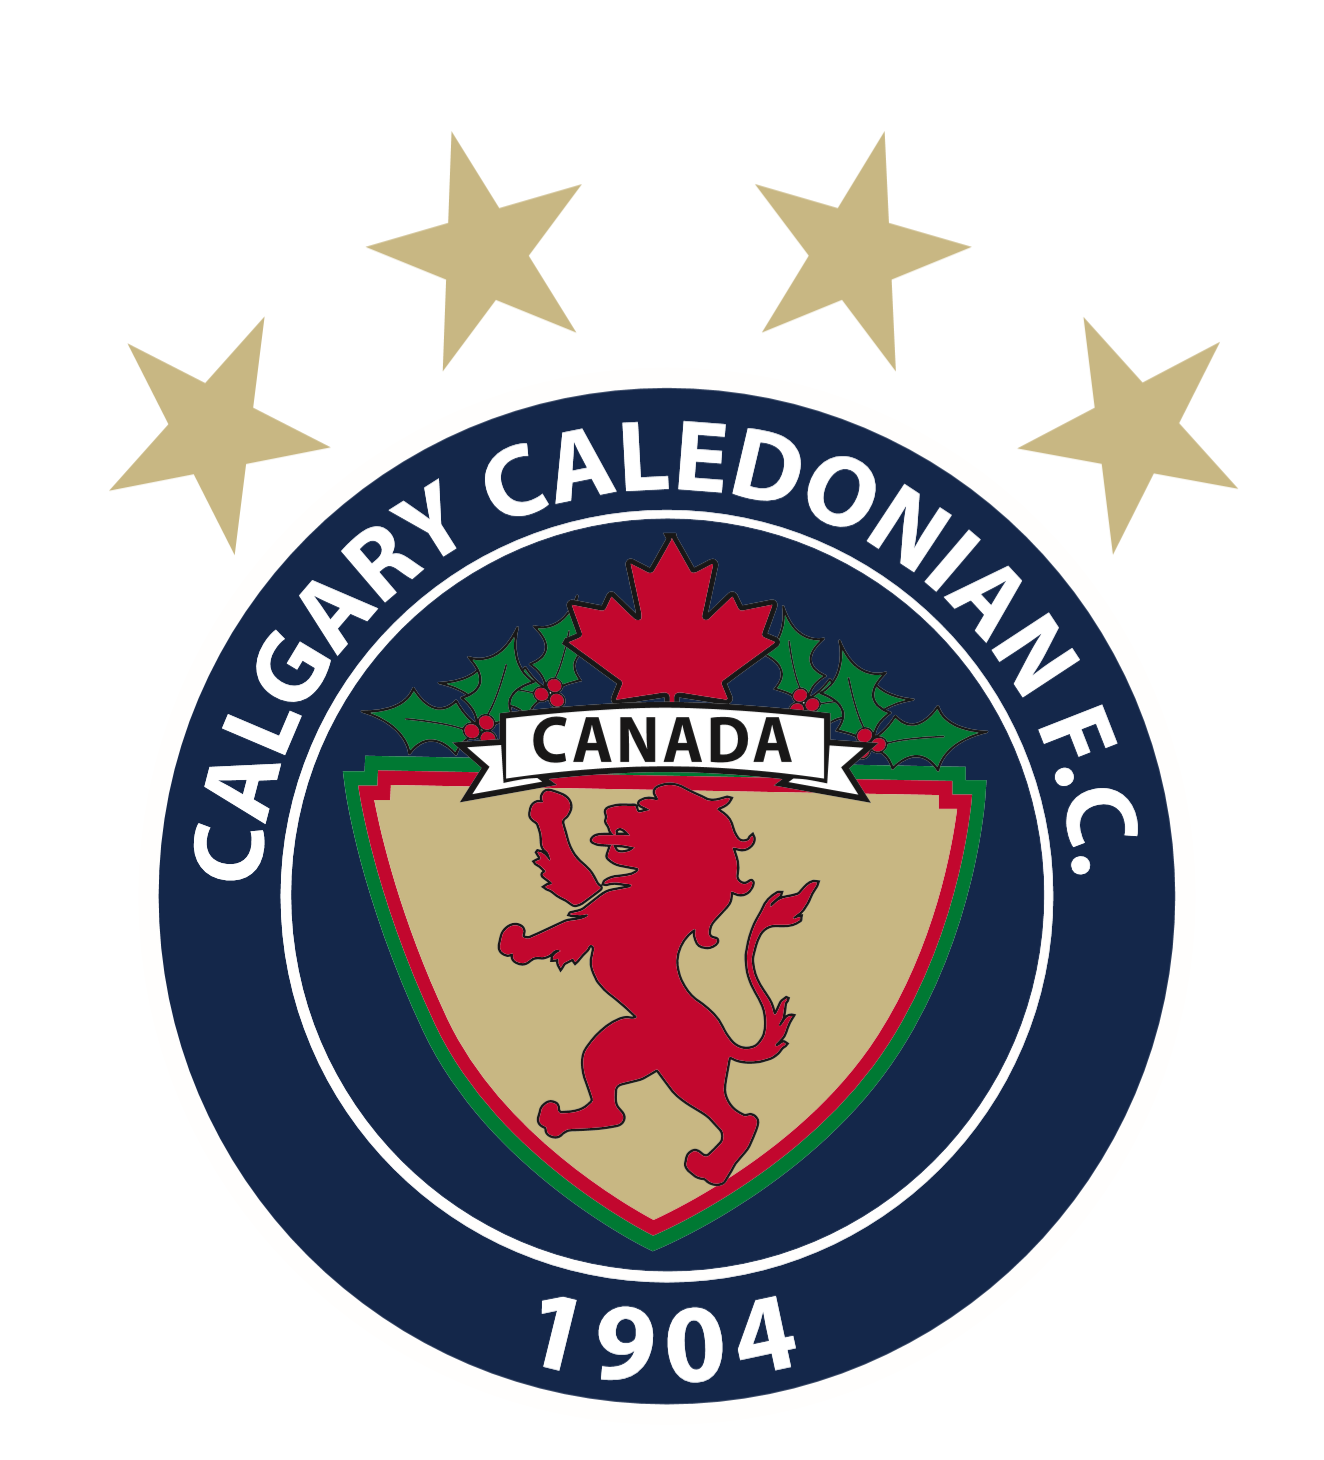 http://site3330.goalline.ca/news_images/org_3330/Image/callies_logo_with_stars_2020_v2.png